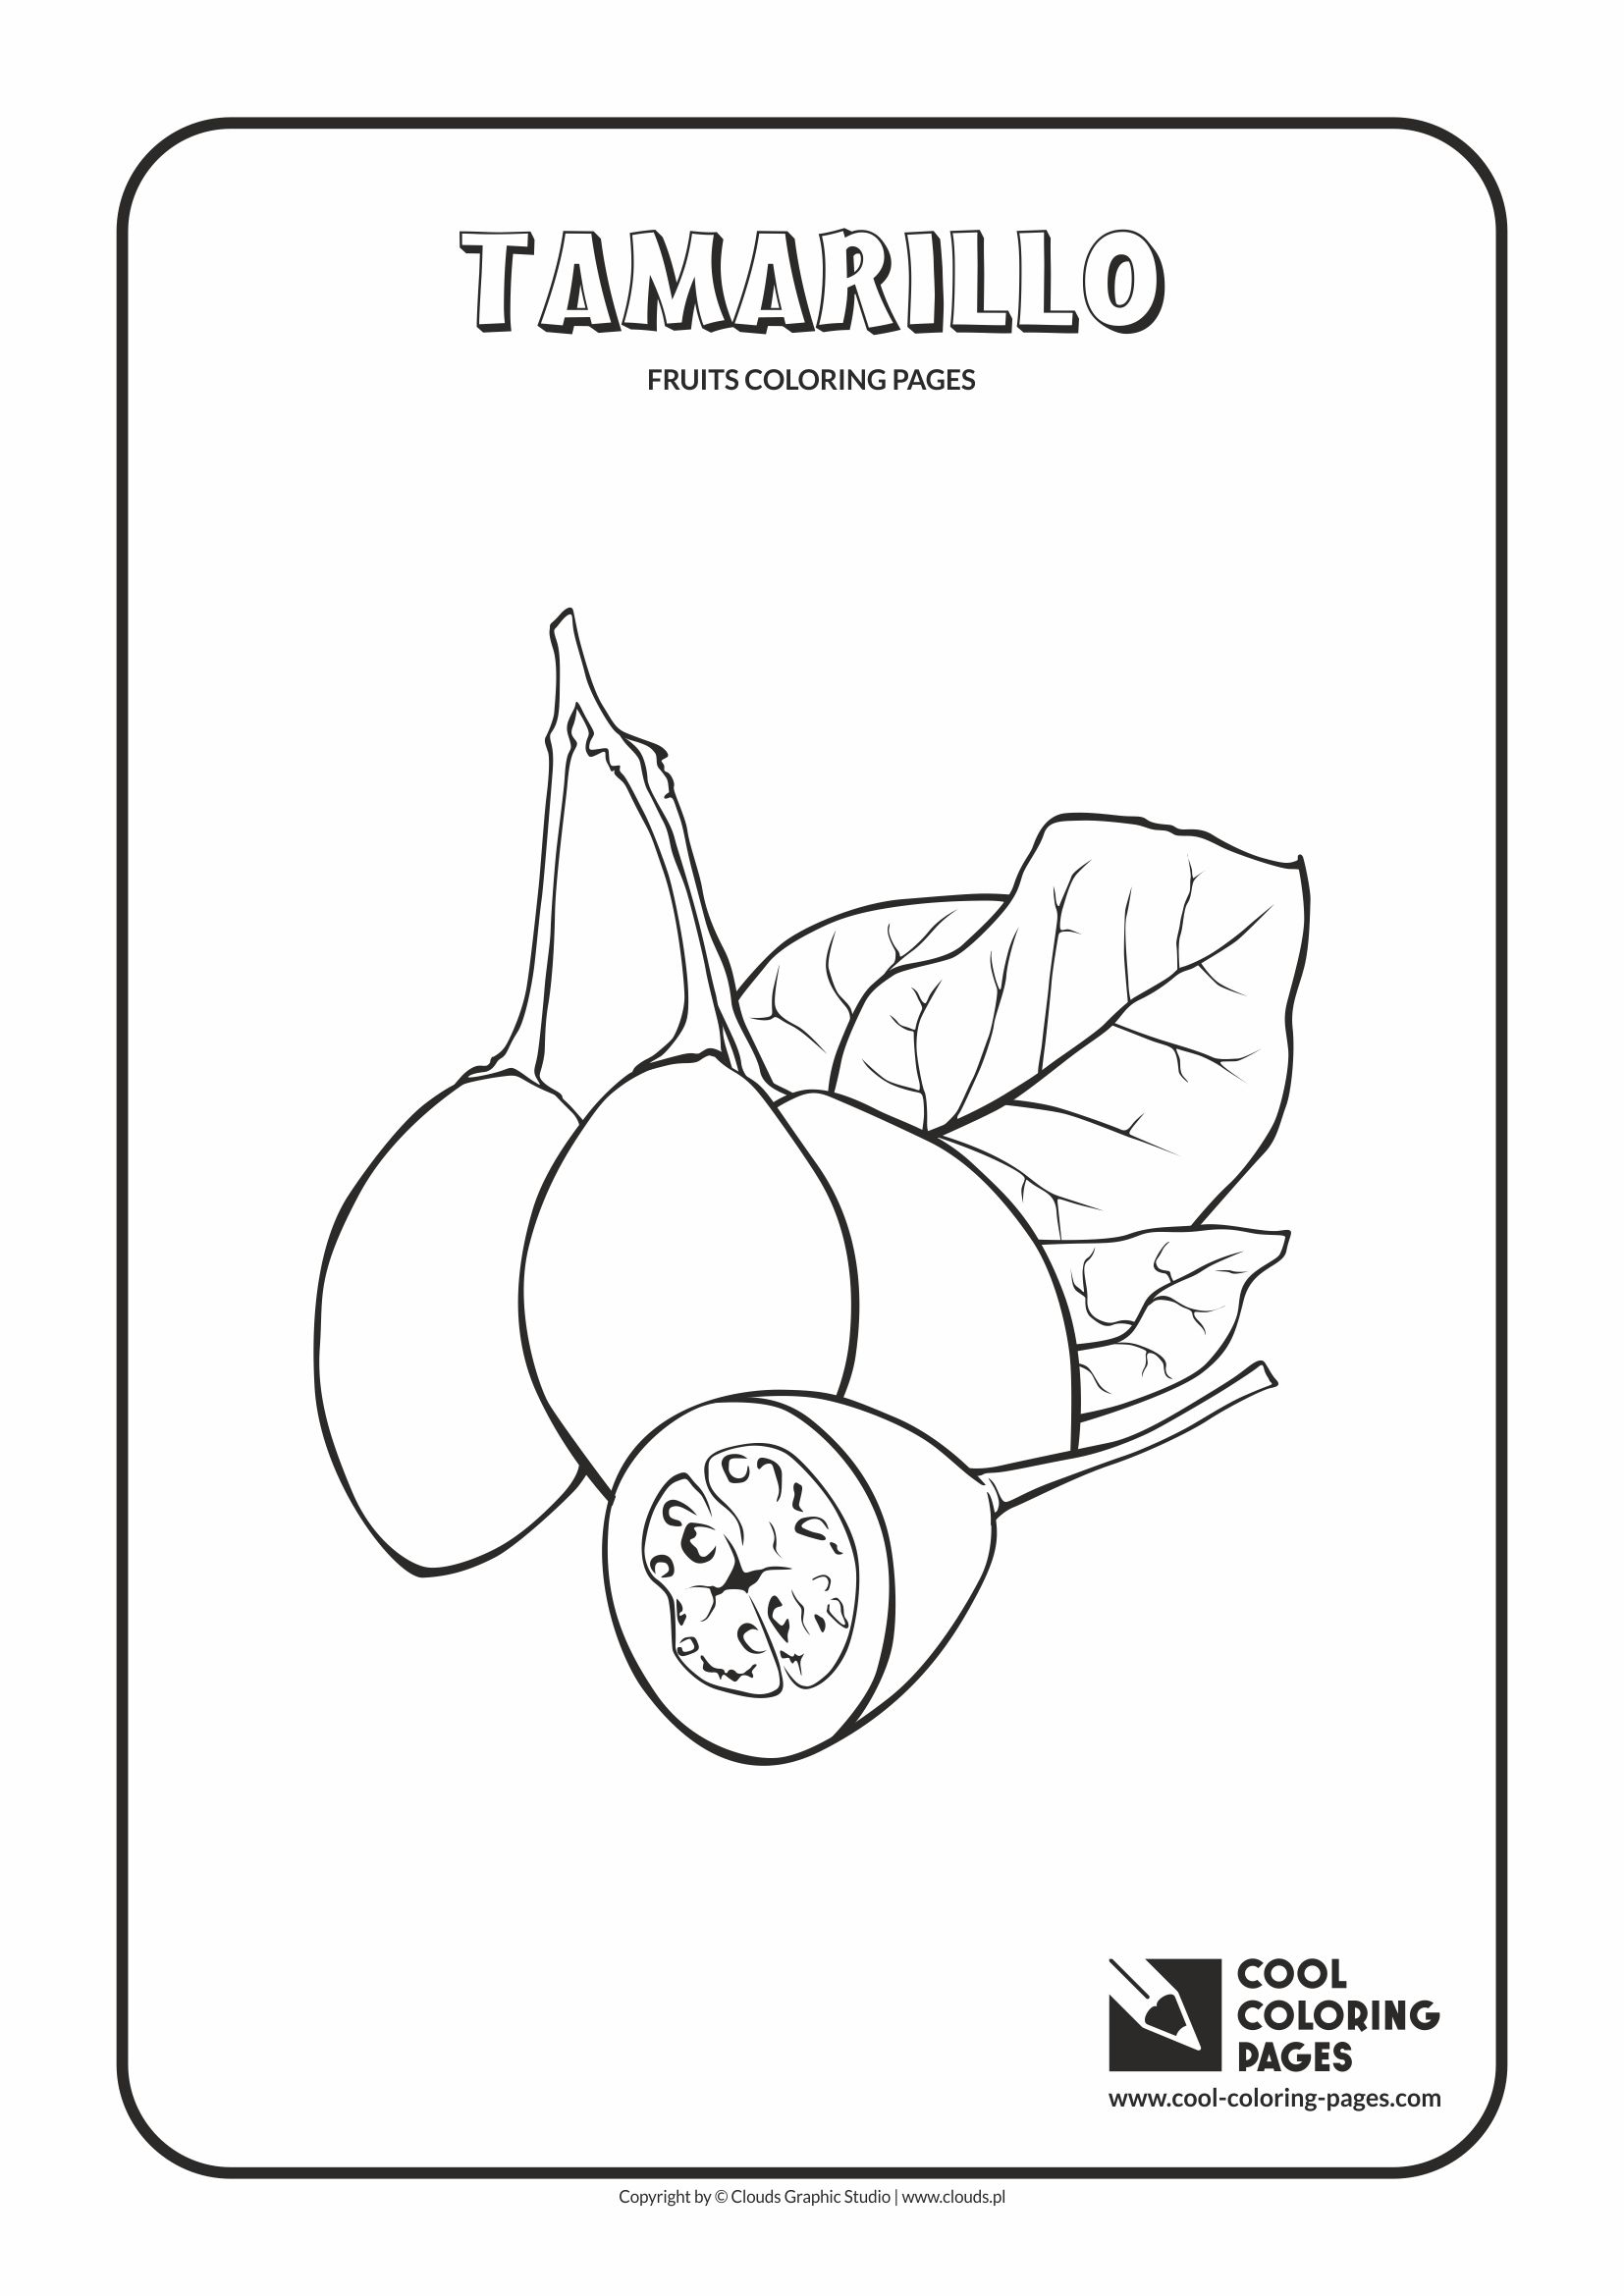 Cool Coloring Pages - Plants / Tamarillo / Coloring page with tamarillo